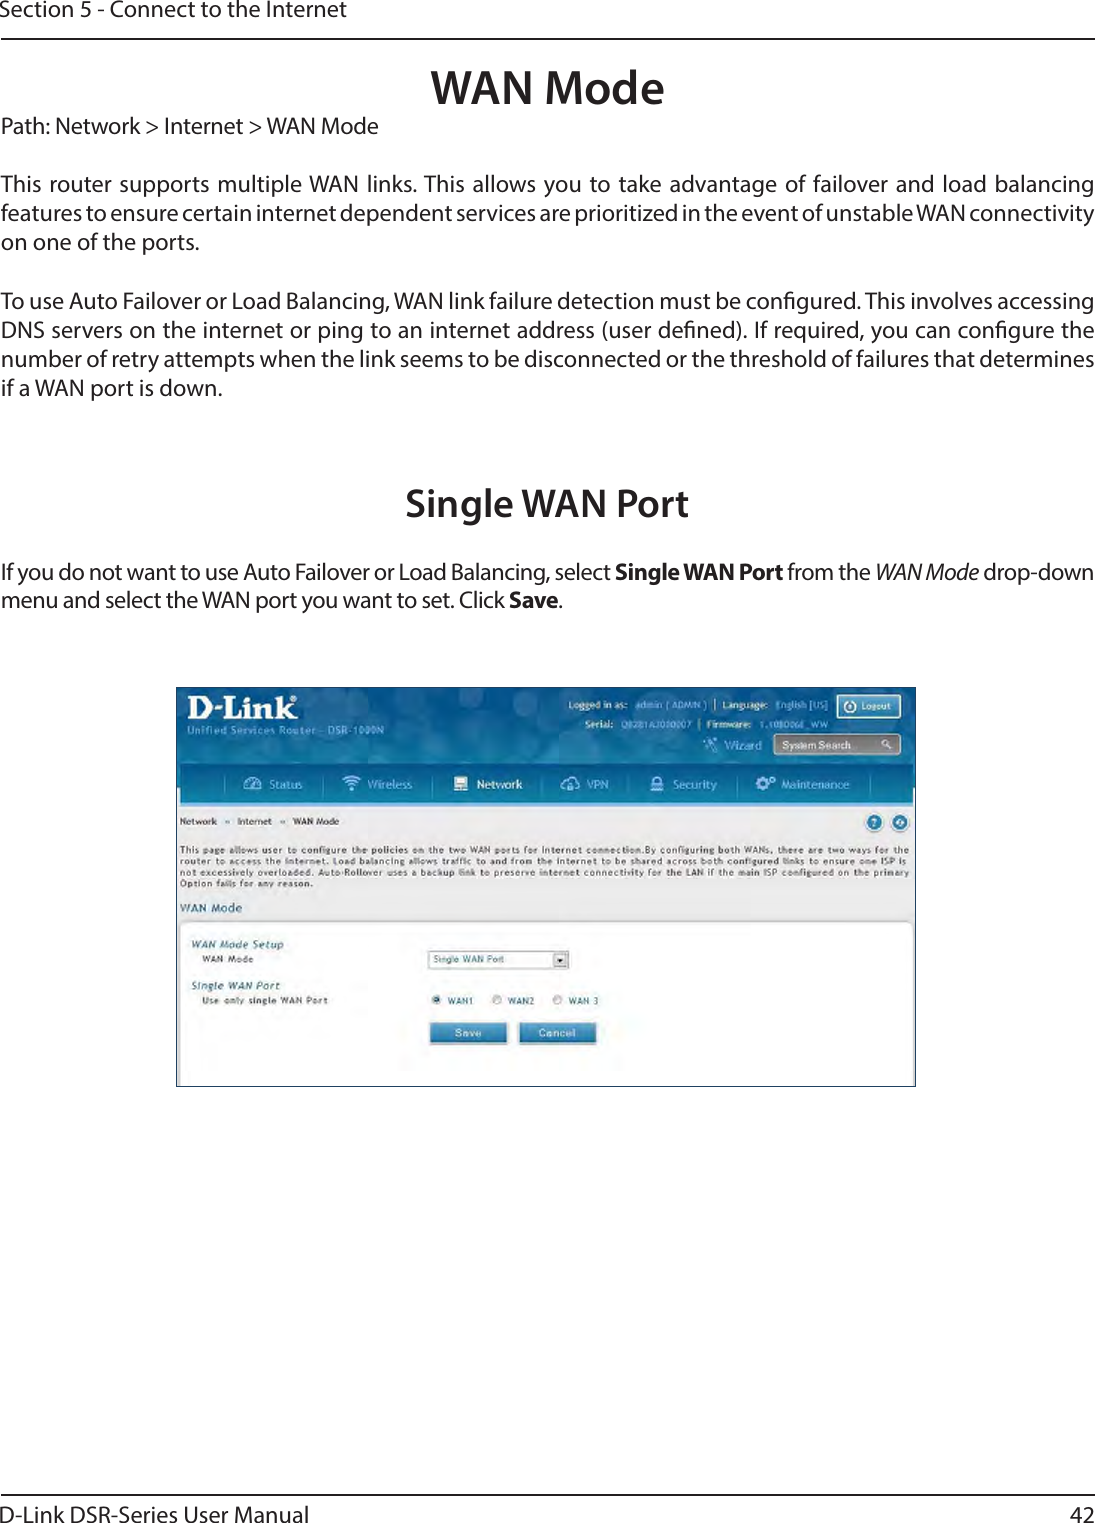 D-Link DSR-Series User Manual 42Section 5 - Connect to the InternetWAN ModeSingle WAN PortPath: Network &gt; Internet &gt; WAN ModeThis router supports multiple WAN links. This allows you to take advantage of failover and load balancing features to ensure certain internet dependent services are prioritized in the event of unstable WAN connectivity on one of the ports.To use Auto Failover or Load Balancing, WAN link failure detection must be congured. This involves accessing DNS servers on the internet or ping to an internet address (user dened). If required, you can congure the number of retry attempts when the link seems to be disconnected or the threshold of failures that determines if a WAN port is down.If you do not want to use Auto Failover or Load Balancing, select Single WAN Port from the WAN Mode drop-down menu and select the WAN port you want to set. Click Save.